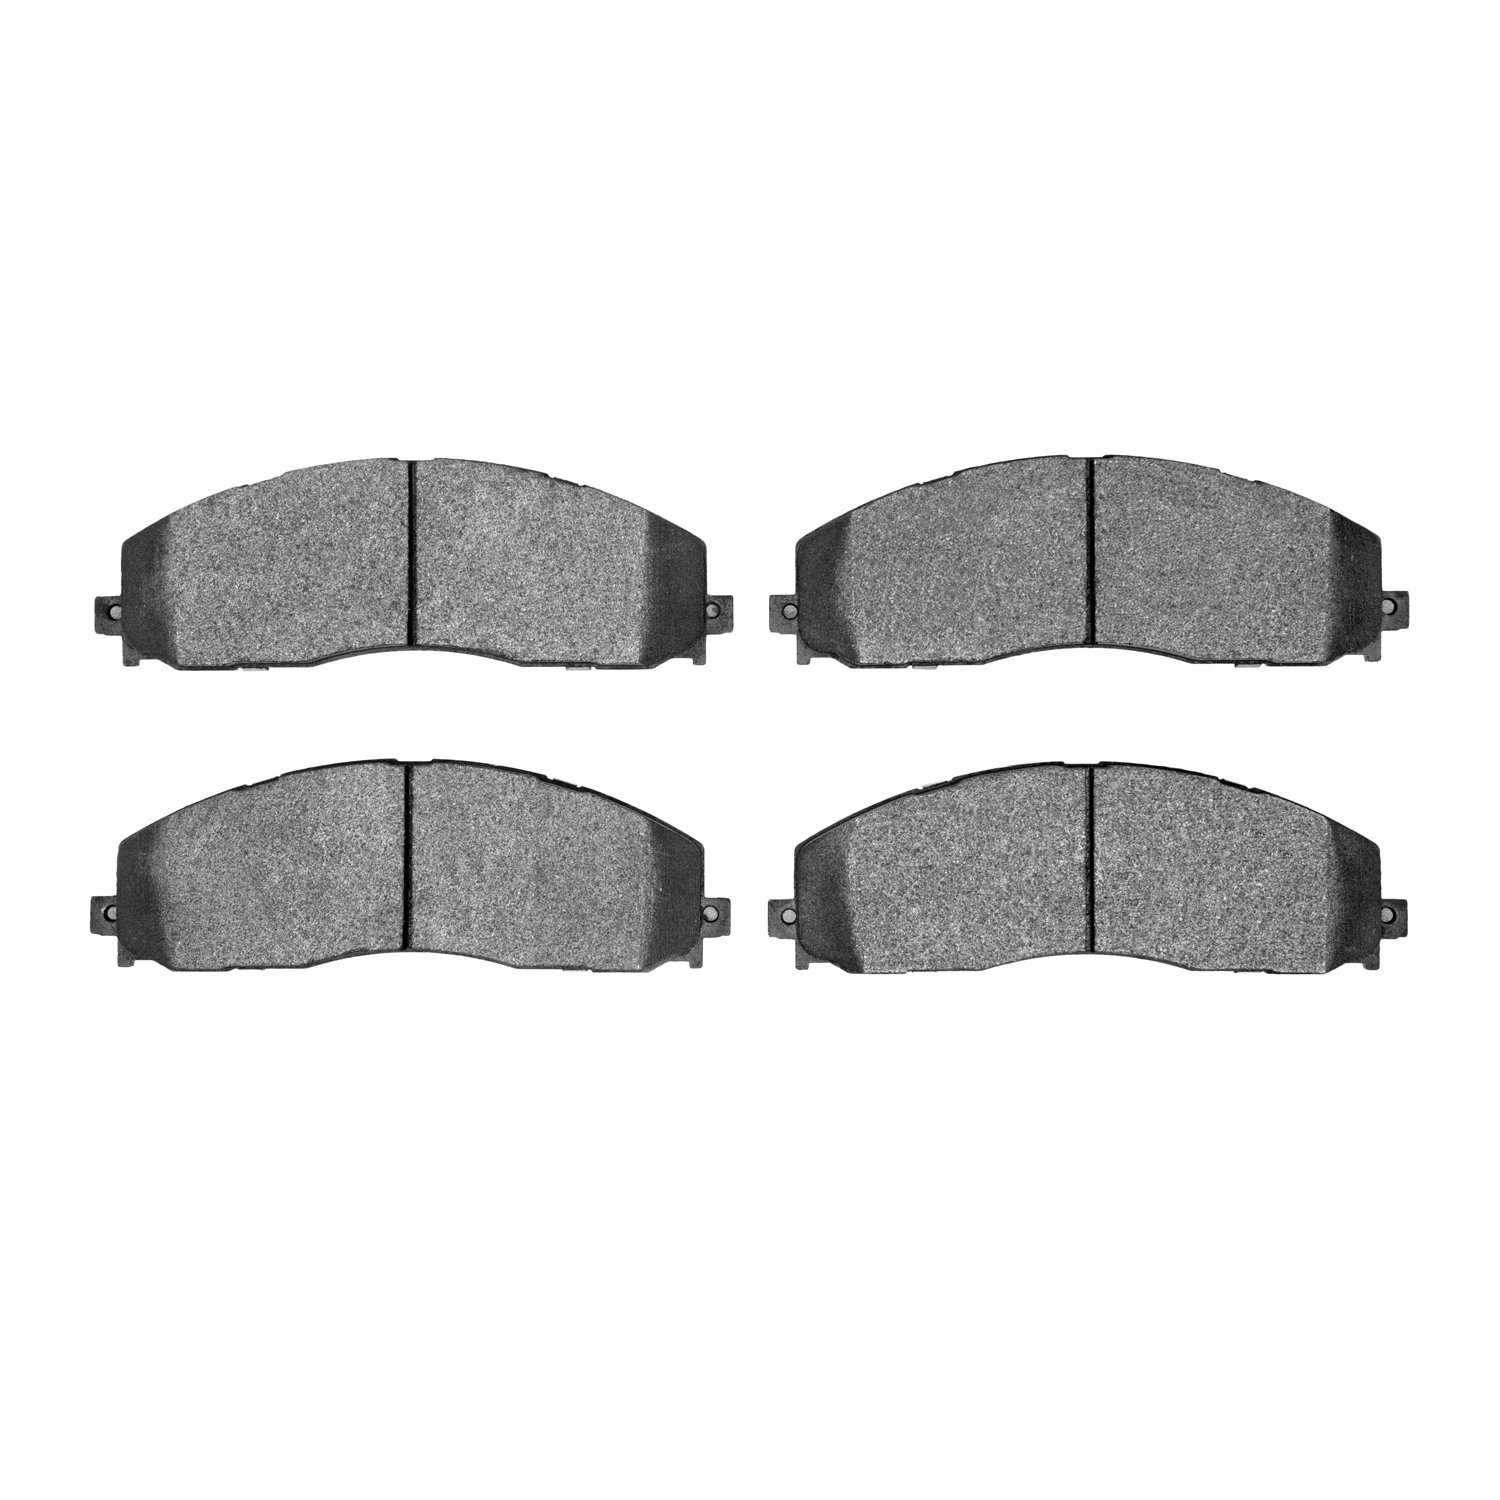 1214-1680-00 Heavy-Duty Semi-Metallic Brake Pads, Fits Select Ford/Lincoln/Mercury/Mazda, Position: Front,Fr